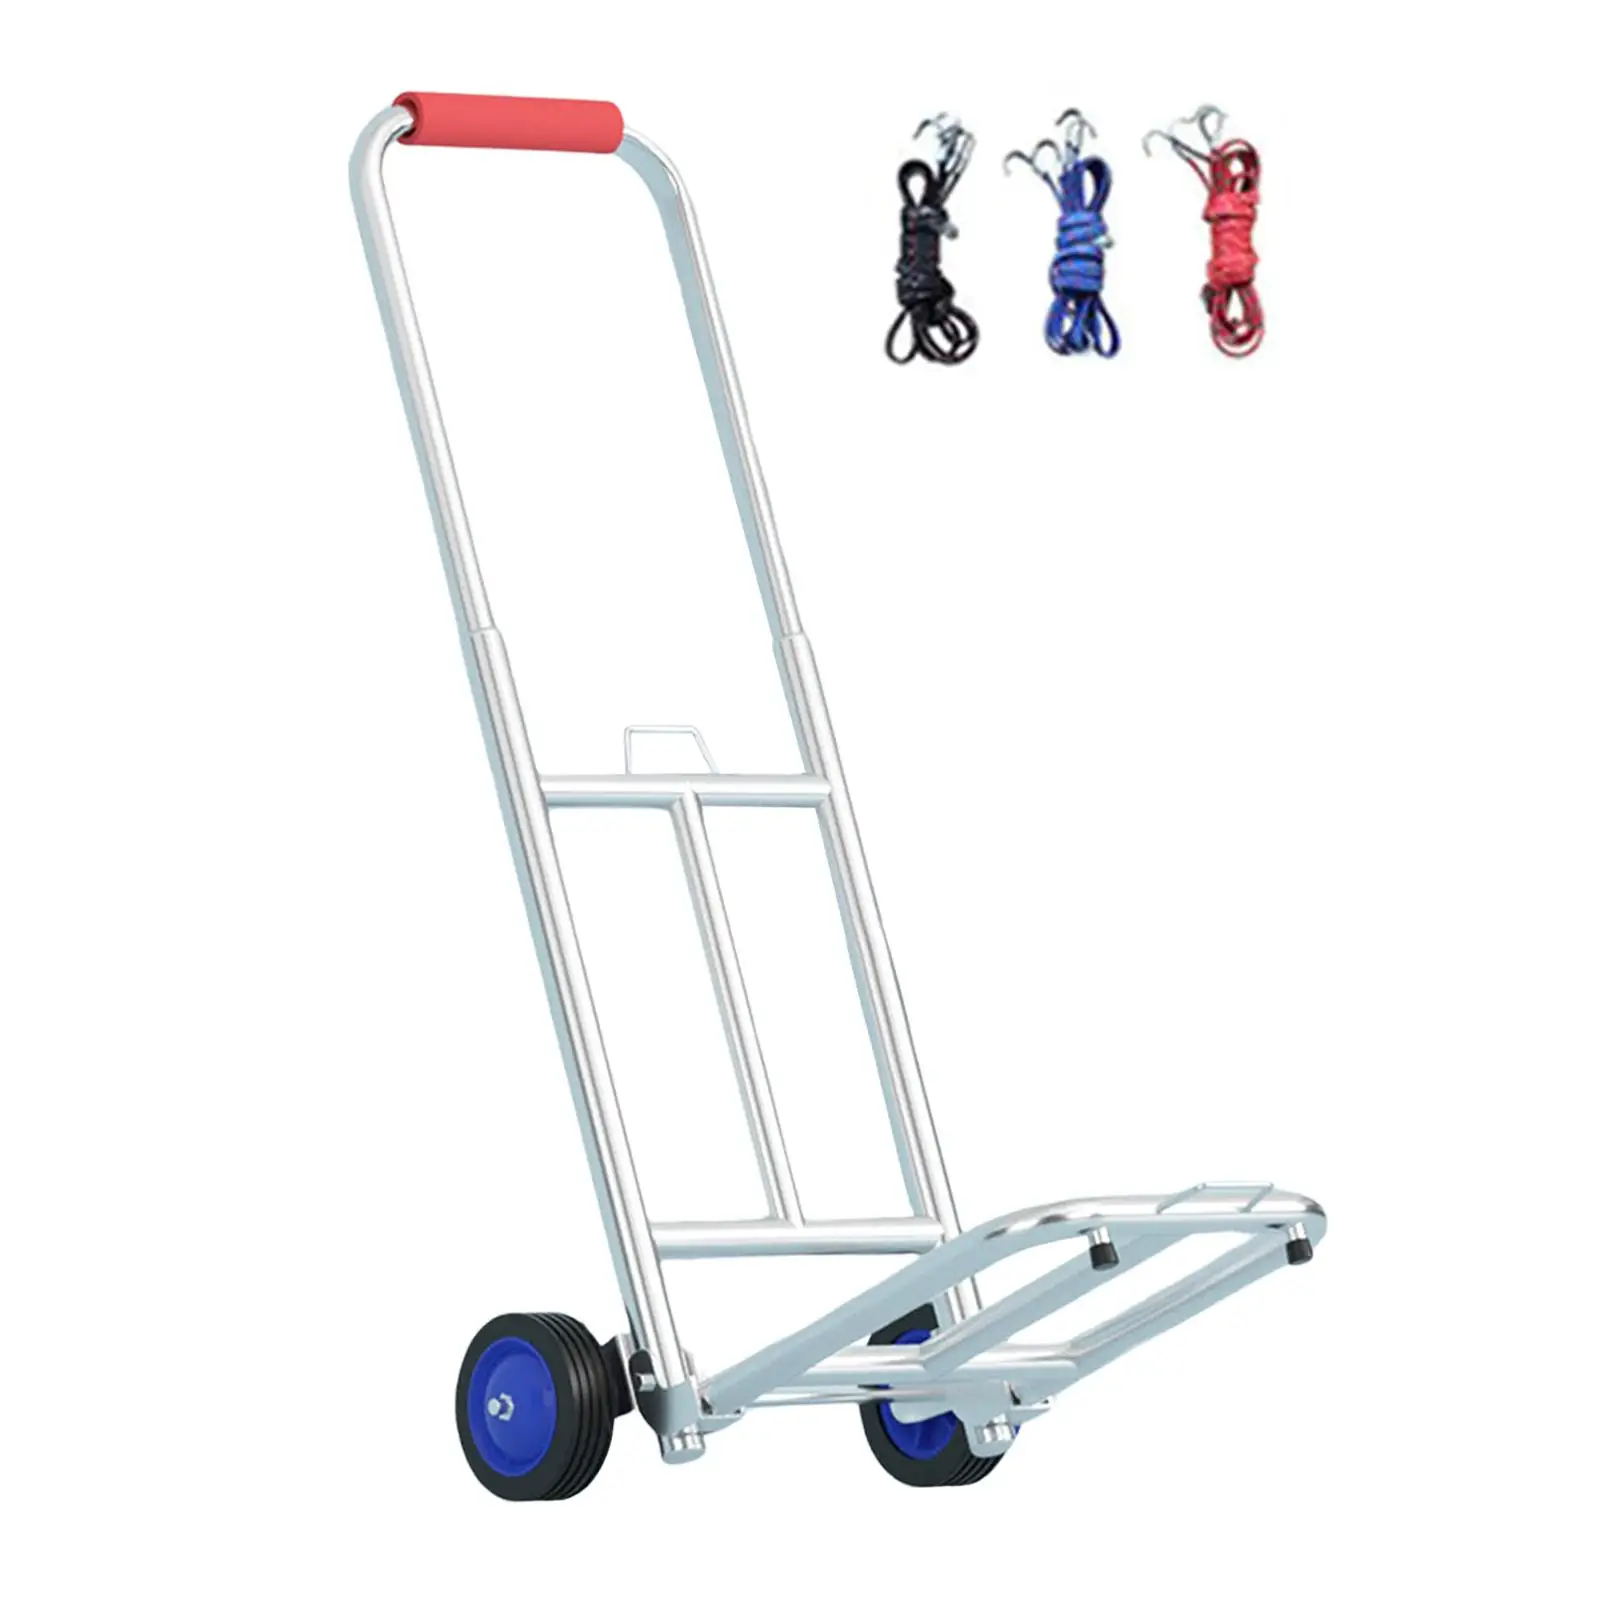 Luggage Trolley Cart Compact Adjustable Foldable Platform Truck Collapsible Foldable Hand Cart for Transportation Travel